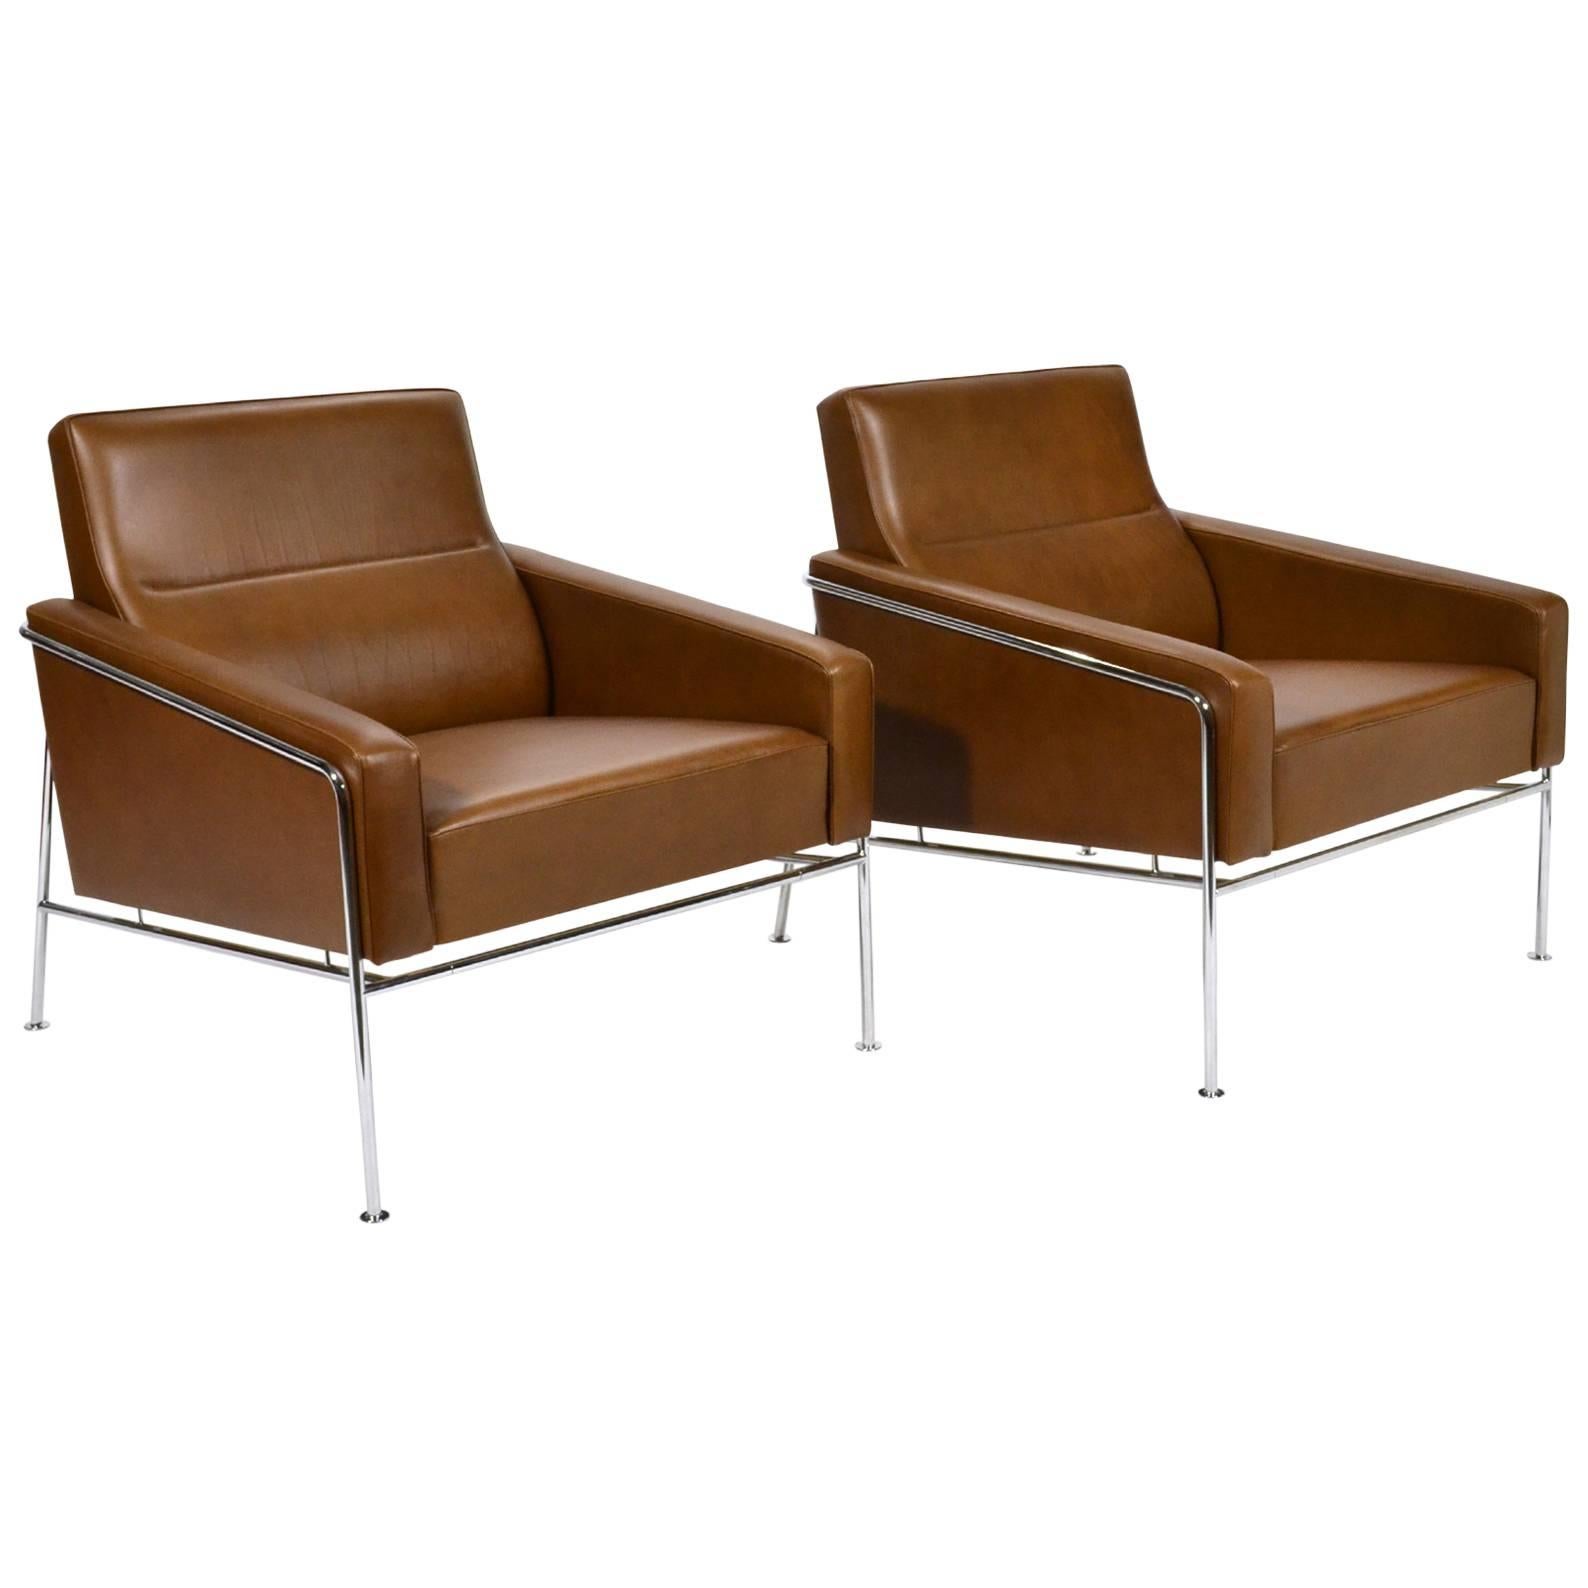 Pair of Arne Jacobsen Series 3300 Lounge Chairs by Fritz Hansen